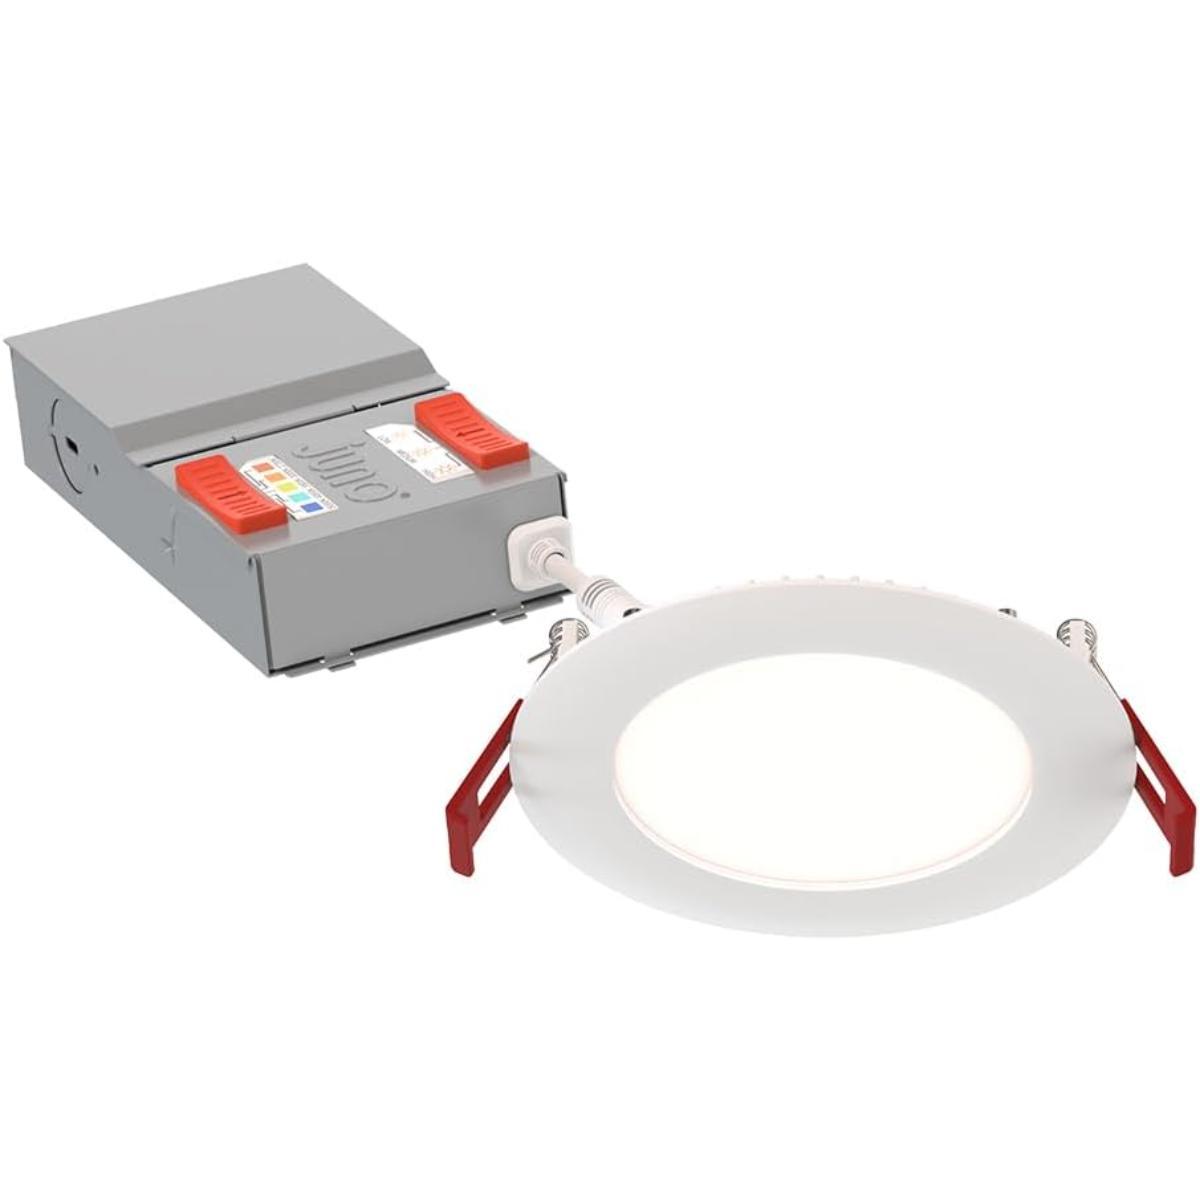 4 inch Wafer Canless Ultra Thin LED Recessed Light, 14.5 Watt, 1100 Lumens, Selectable CCT, 2700K to 5000K, 120-277V